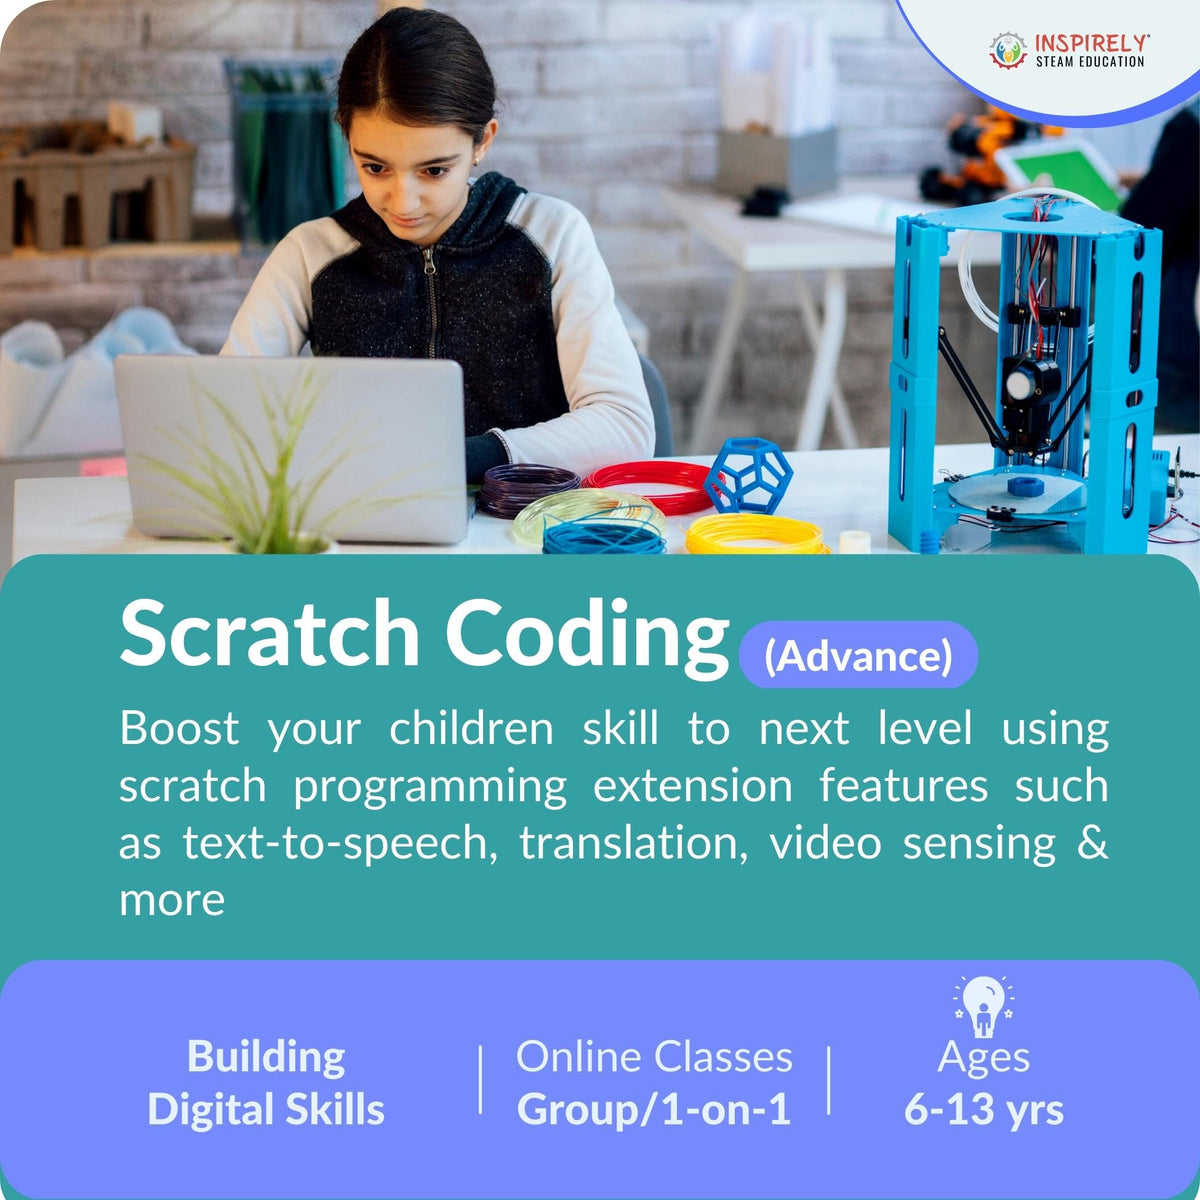 INSPIRELY Scratch Coding (advanced) after-school Online Class children Ages 6-14 Inspirely STEAM Education coding for kids that code coding courses coding programs coding clas block-based coding javascript python for kids computer science comp sci digital literacy future digital skills grit growth-mindset STEM education 21st century life skills hands-on learning idea creativity STEM programs courses brampton STEM programs courses toronto STEM programs courses gta innovative children free trial class